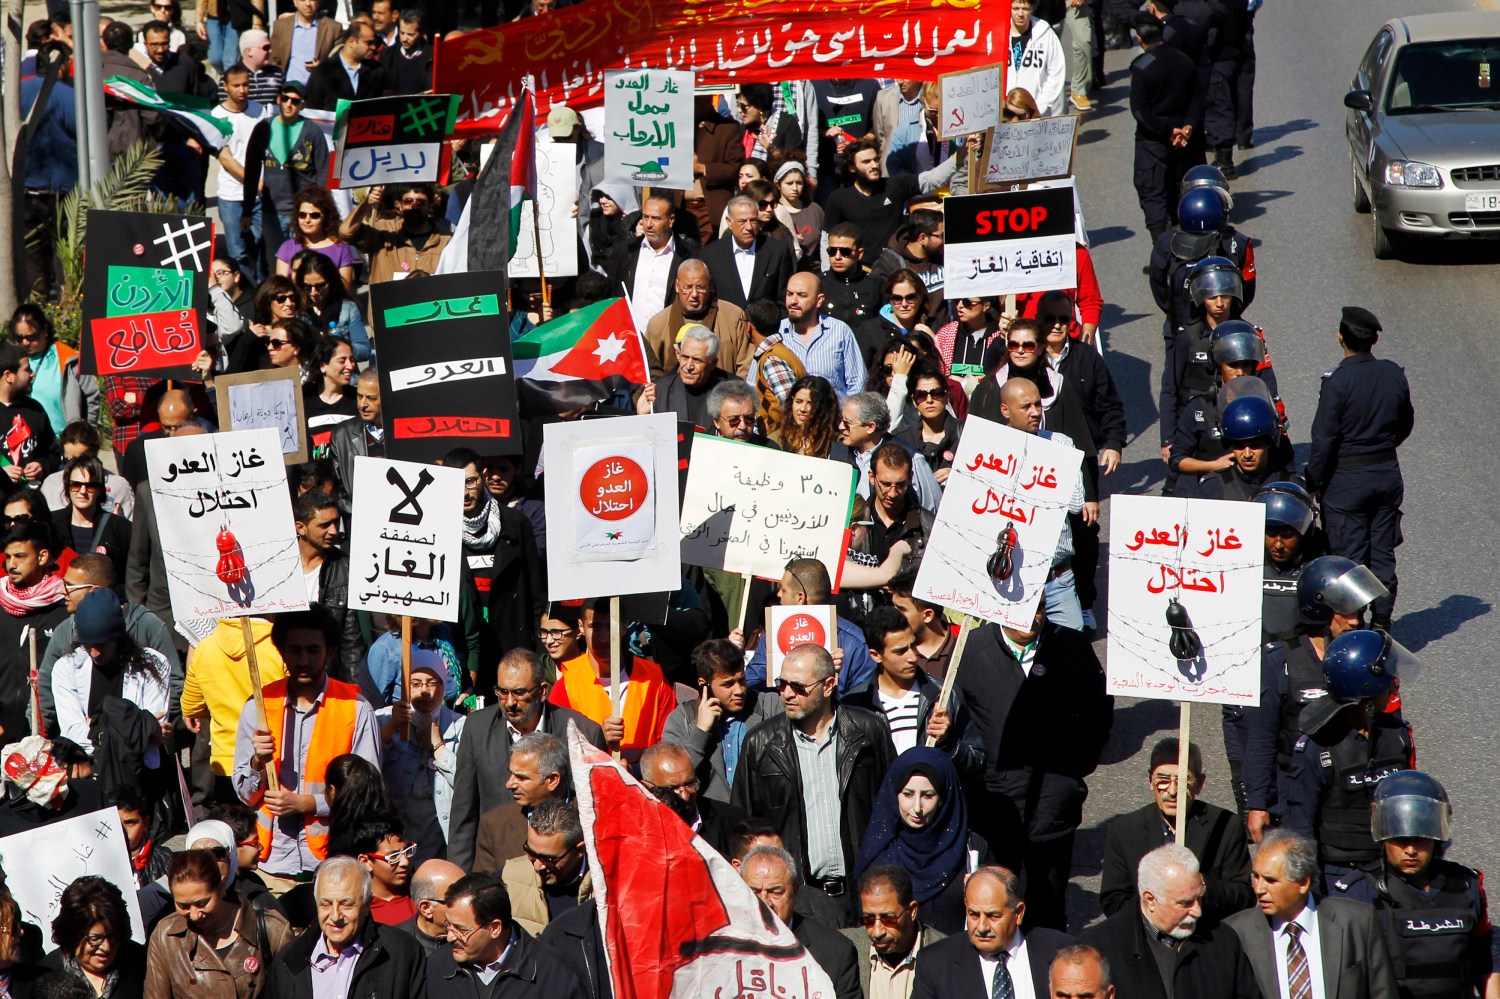 Jordanian protesters take part in a march against a government agreement to import natural gas from Israel, in Amman March 6, 2015. The placards read "The enemy's gas is occupation" (R) and "No to the Zionist gas deal" (2nd L). REUTERS/Majd Jaber (JORDAN - Tags: POLITICS CIVIL UNREST BUSINESS ENERGY) - RTR4SBEK